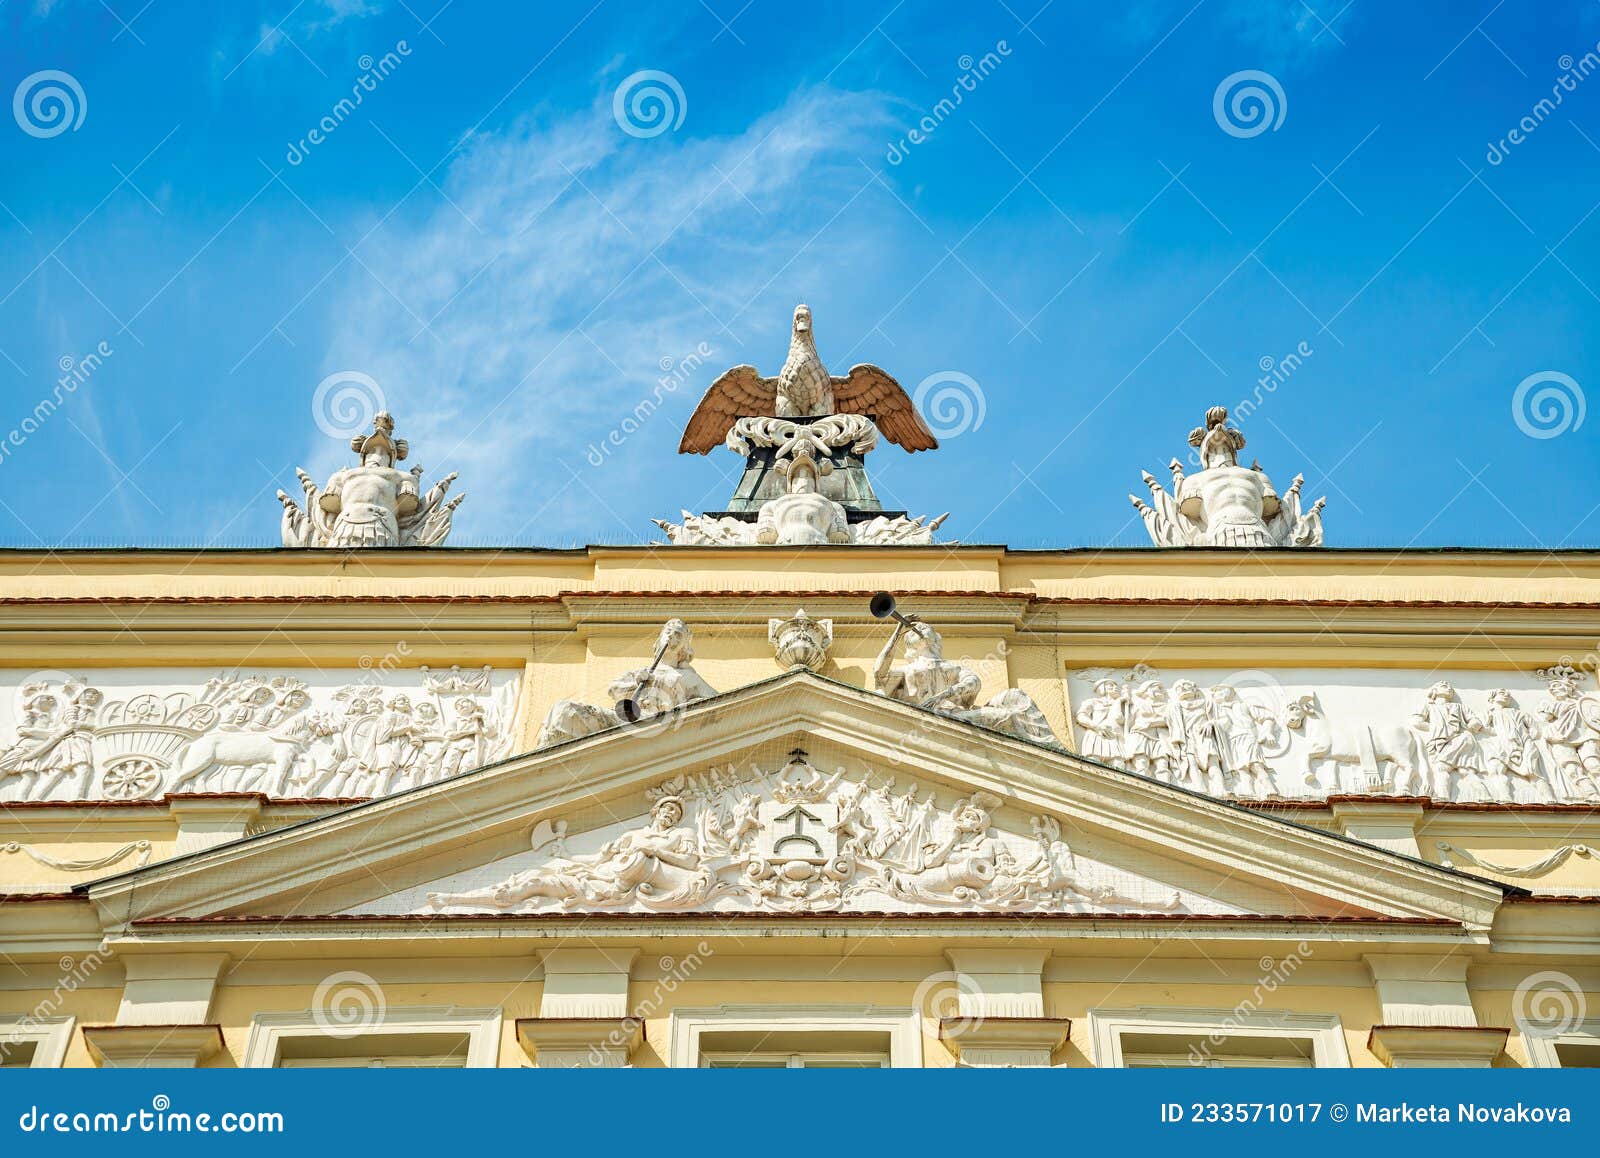 poznan, poland - august 09, 2021. statues on the roof of kornicka library - biblioteka kornicka in palac dzialynskich with protect